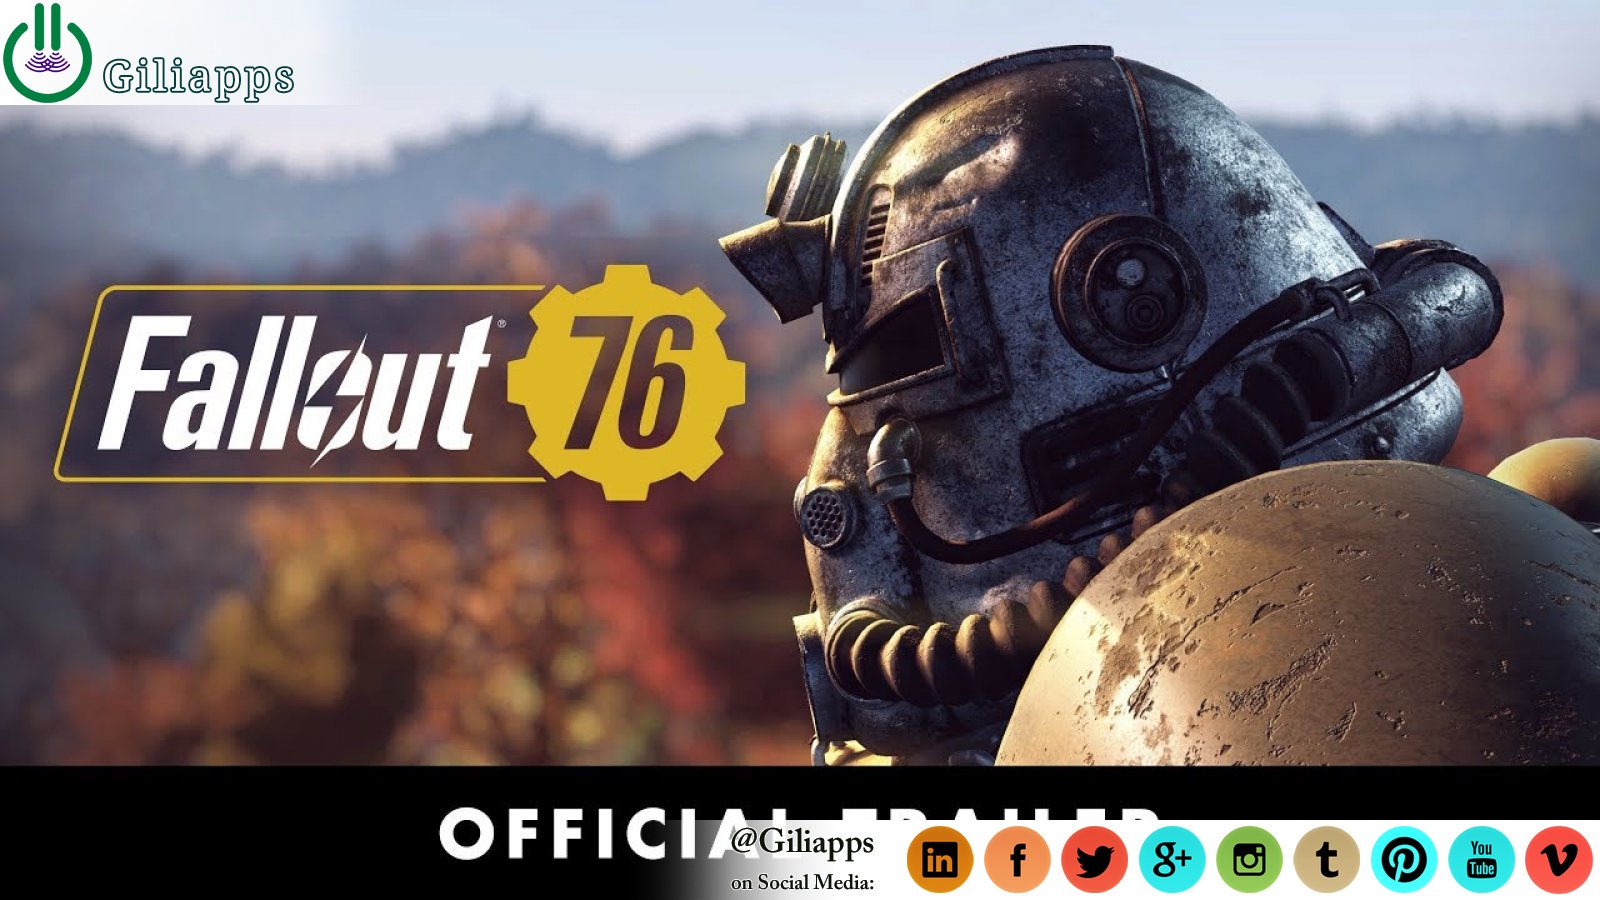 Fallout 76 will release on 14 Nov 2018